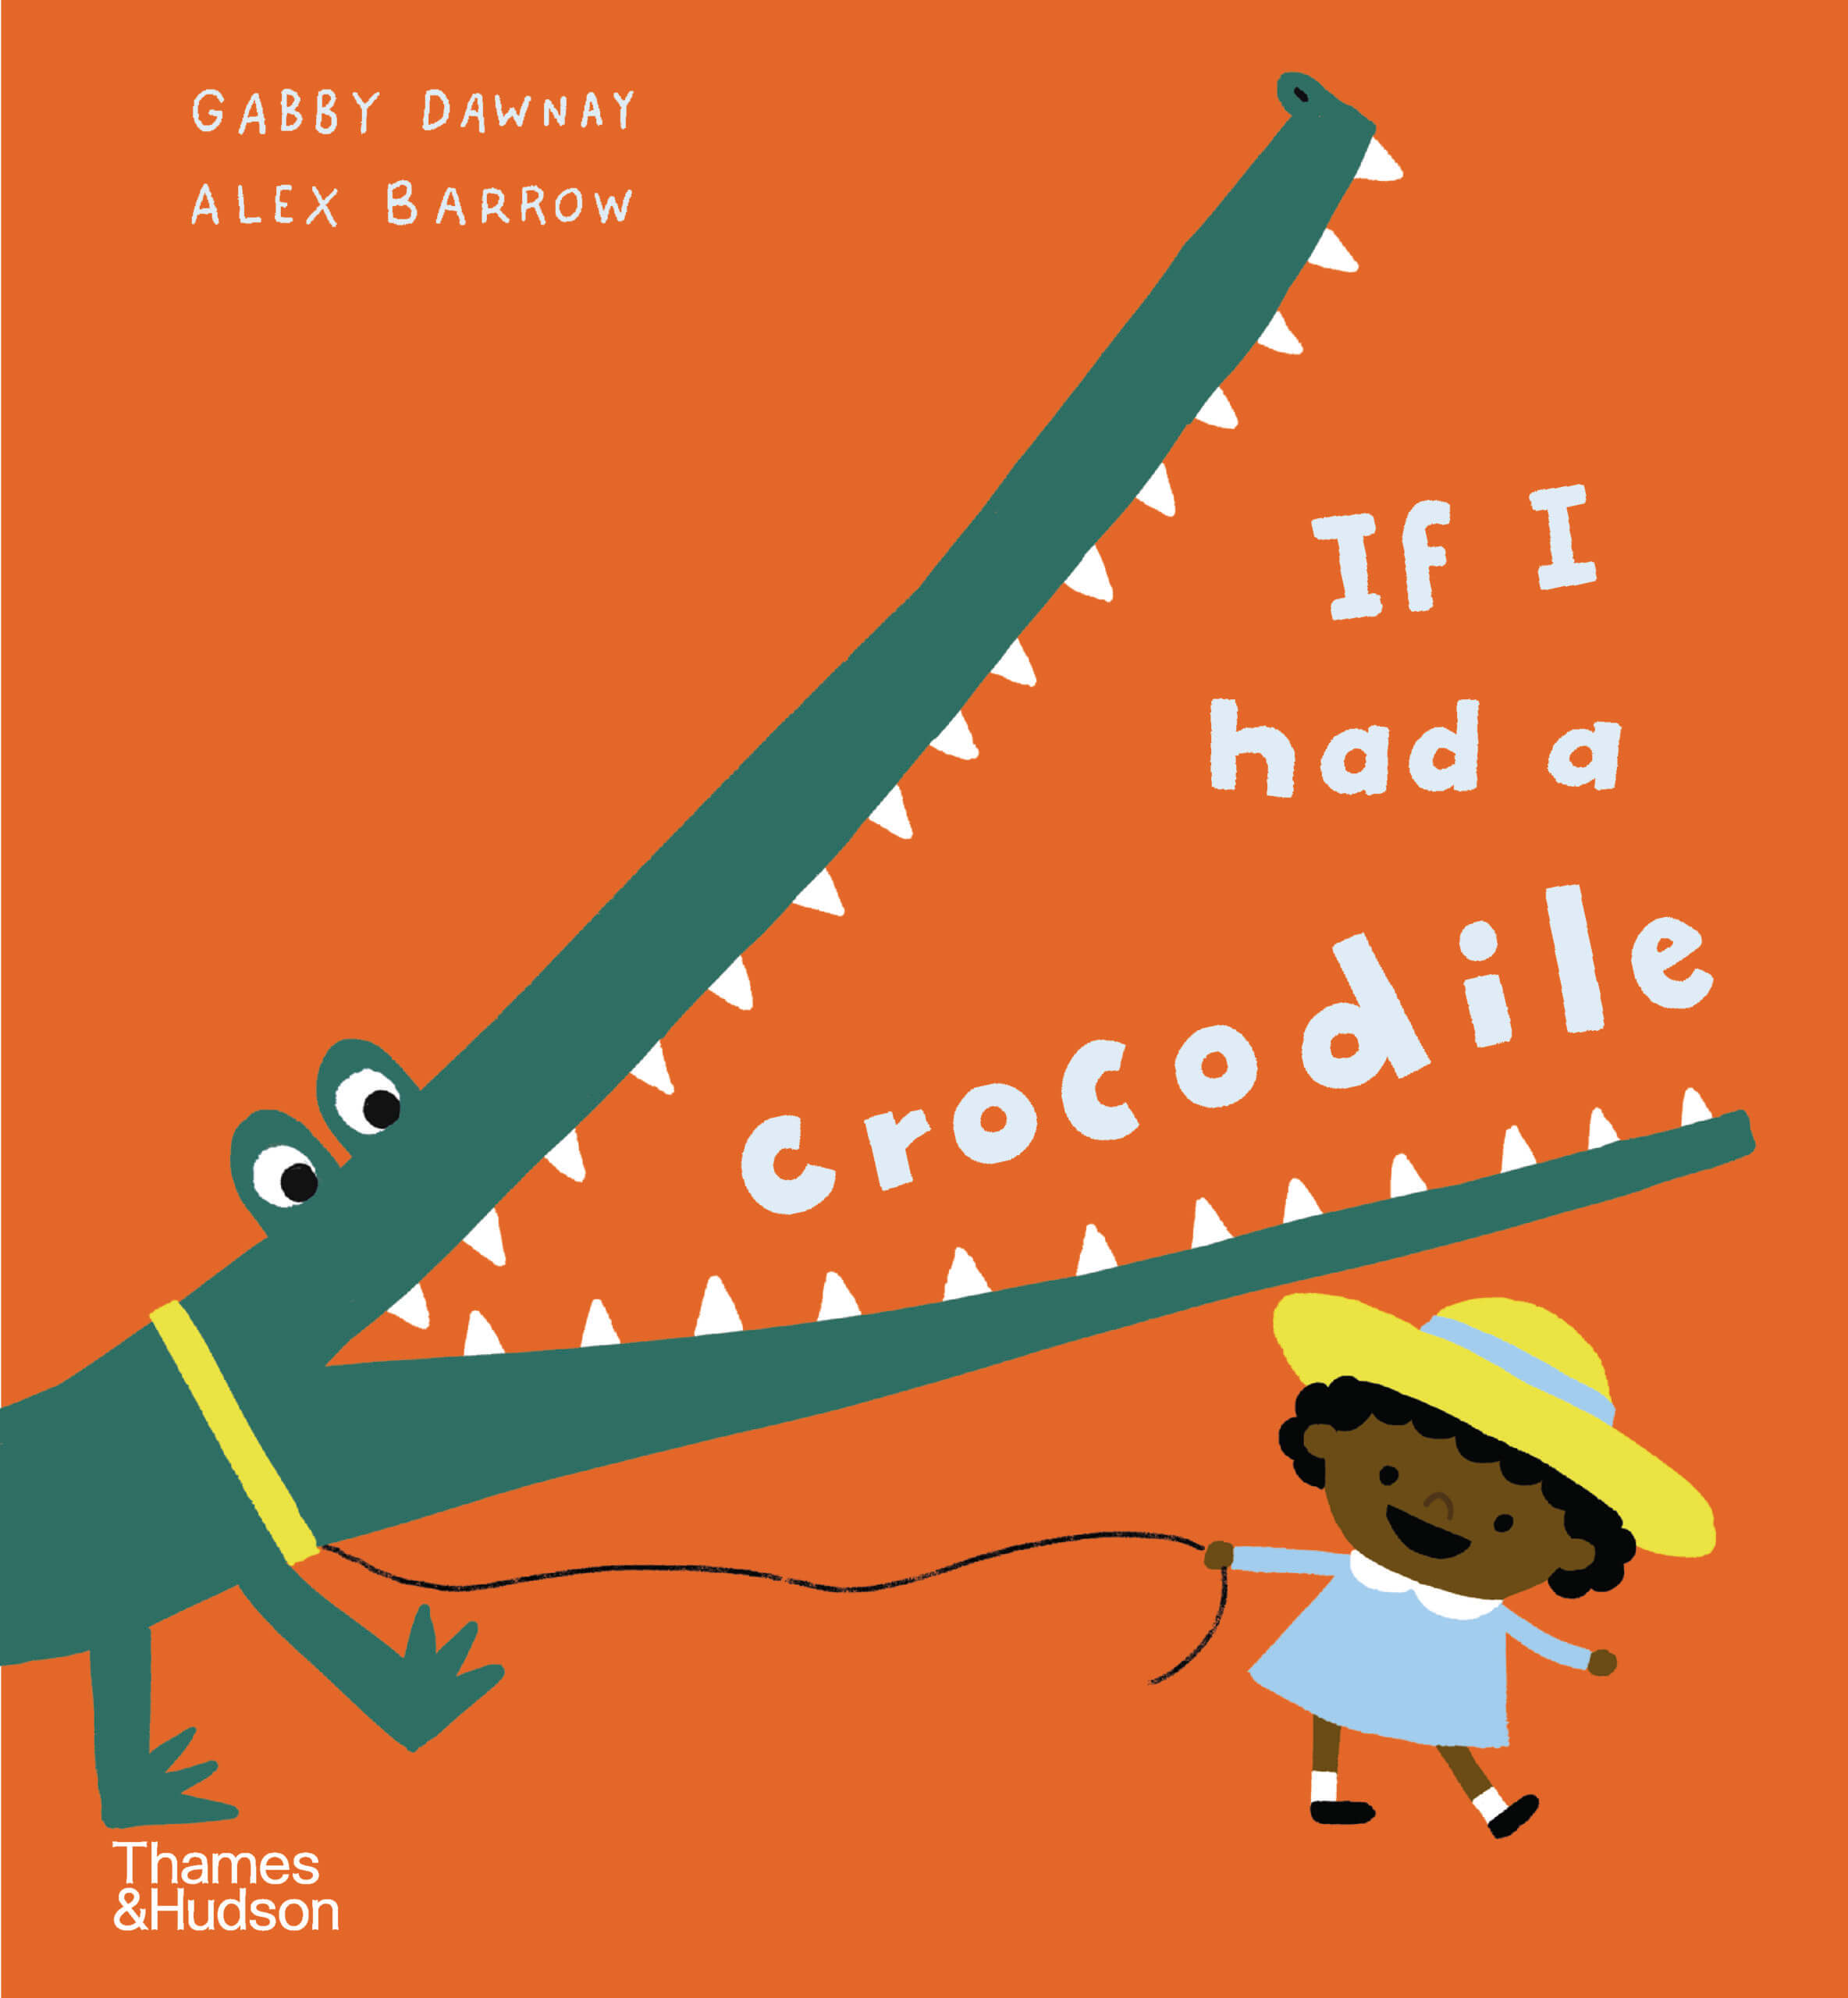 Cover image for 'If I Had A Crocodile'. Simple illustration of a crocodile snapping at a little girl on orange background. Title printed in pale, handwritten style font